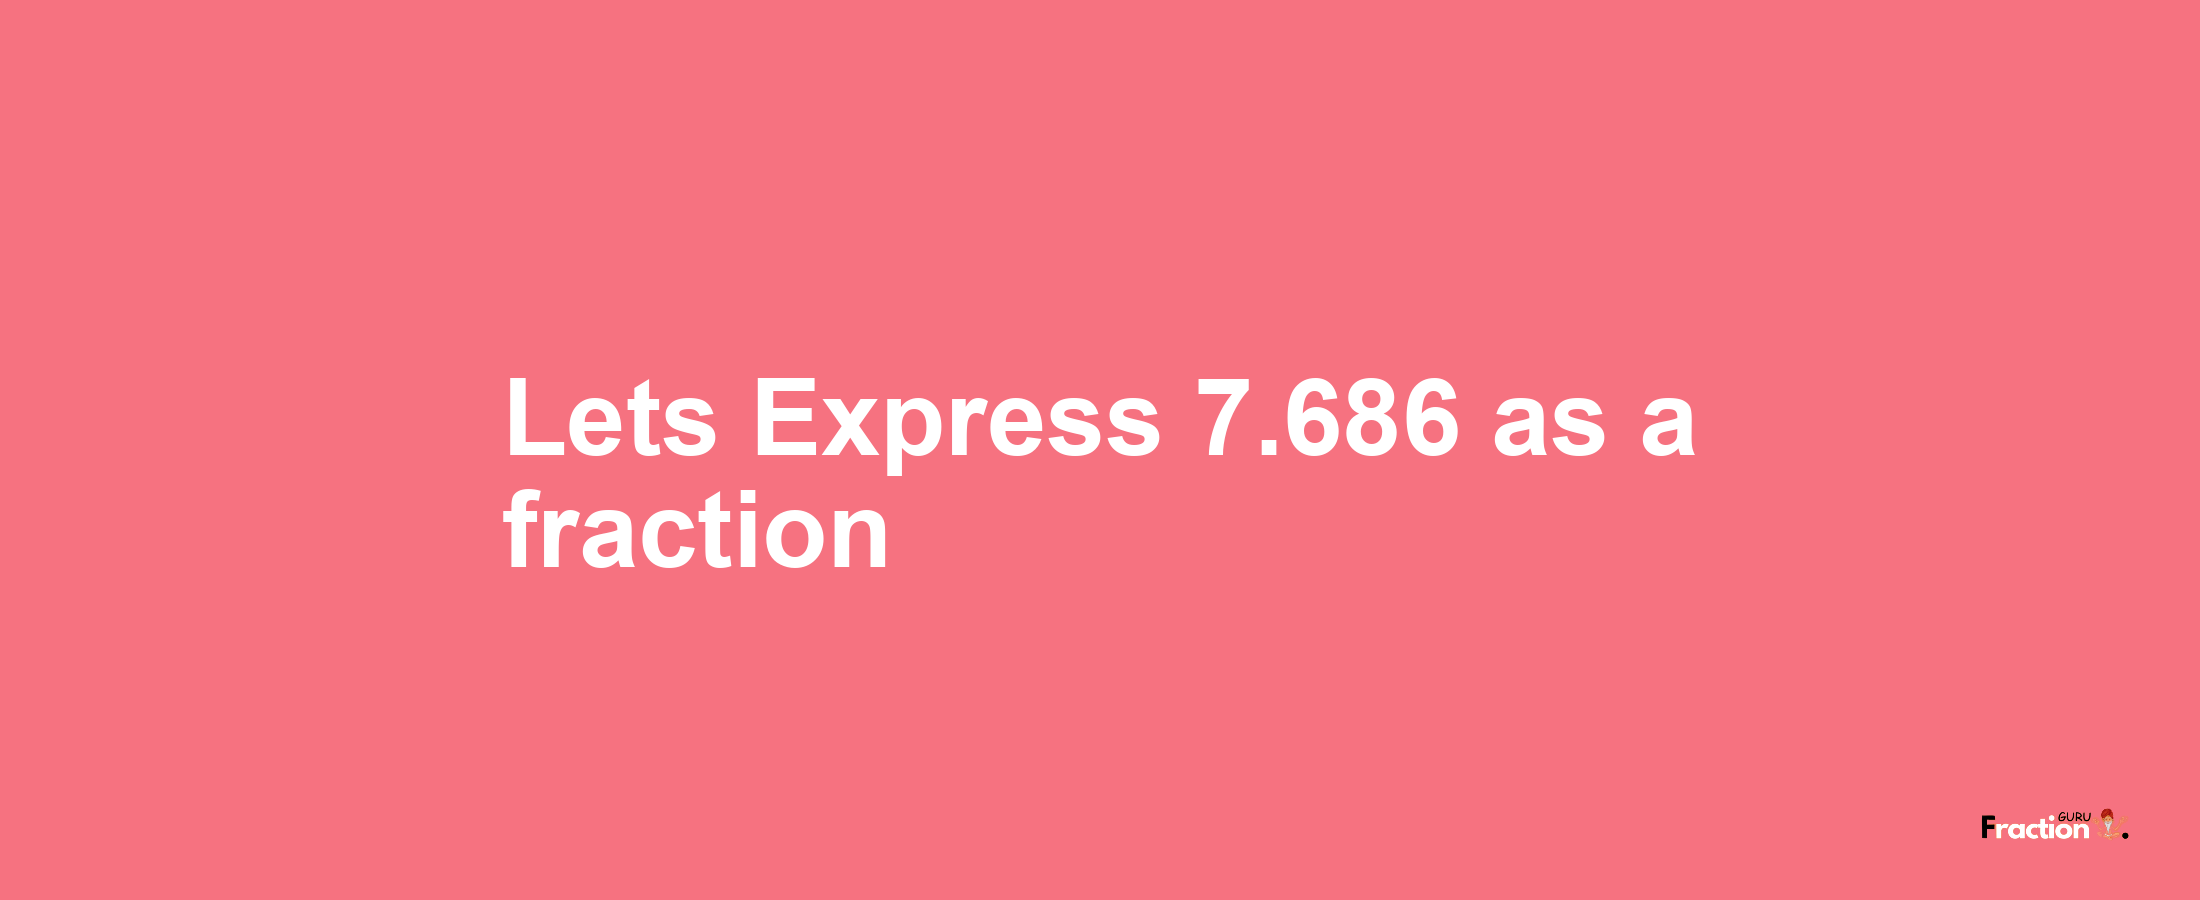 Lets Express 7.686 as afraction